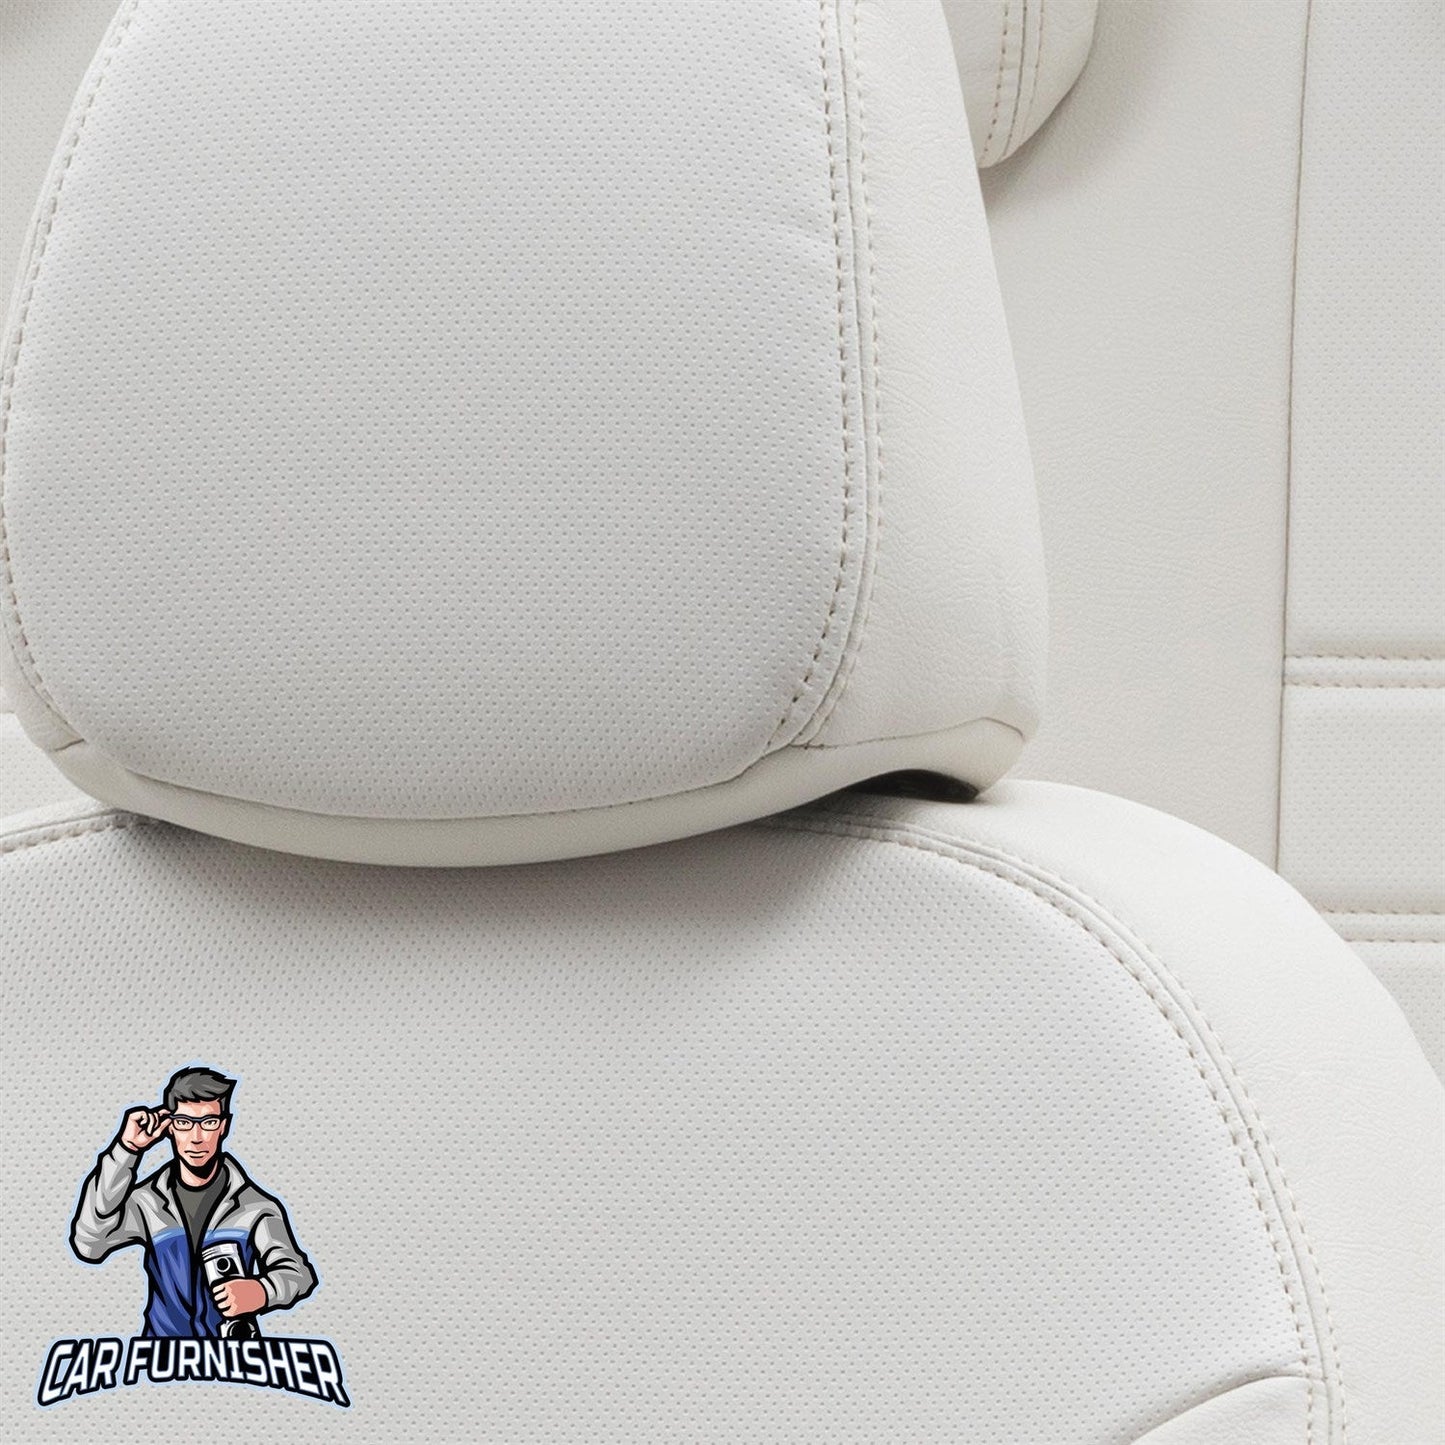 Citroen C2 Seat Covers Istanbul Leather Design Ivory Leather